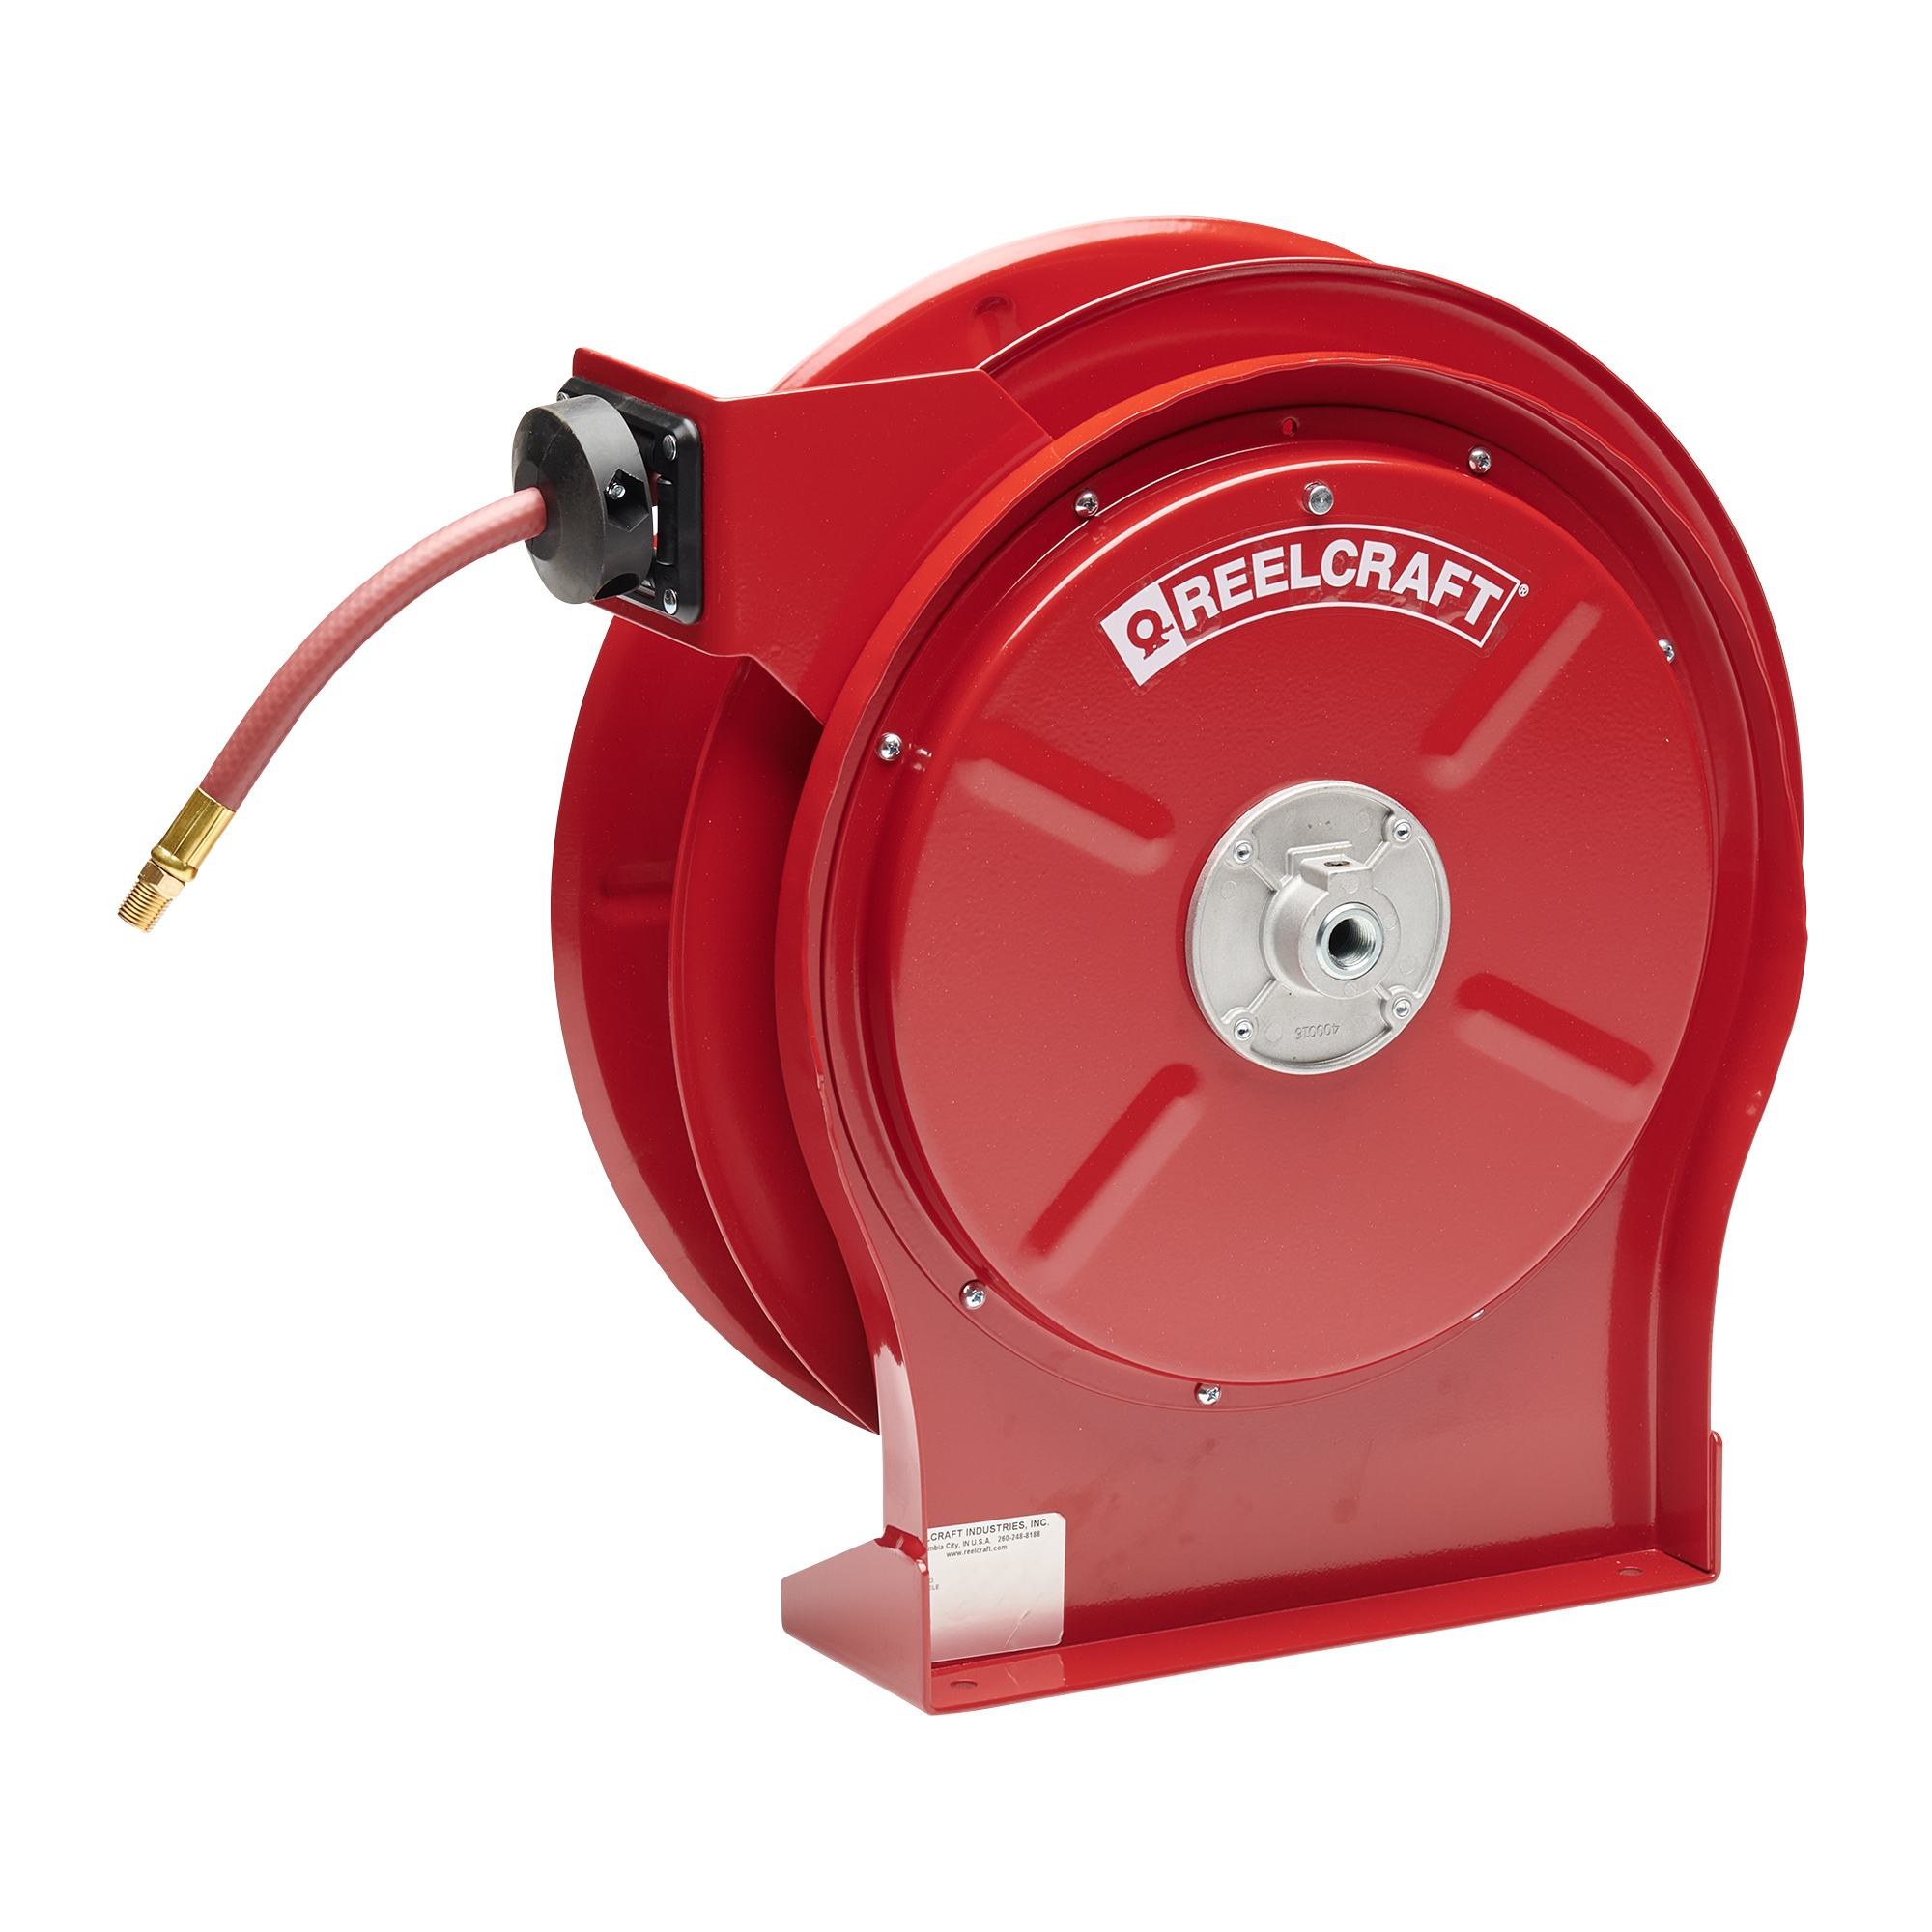 601017-50 1 Pressure: 300 psi Red Reelcraft 50 ft Max PVC Air Hose 